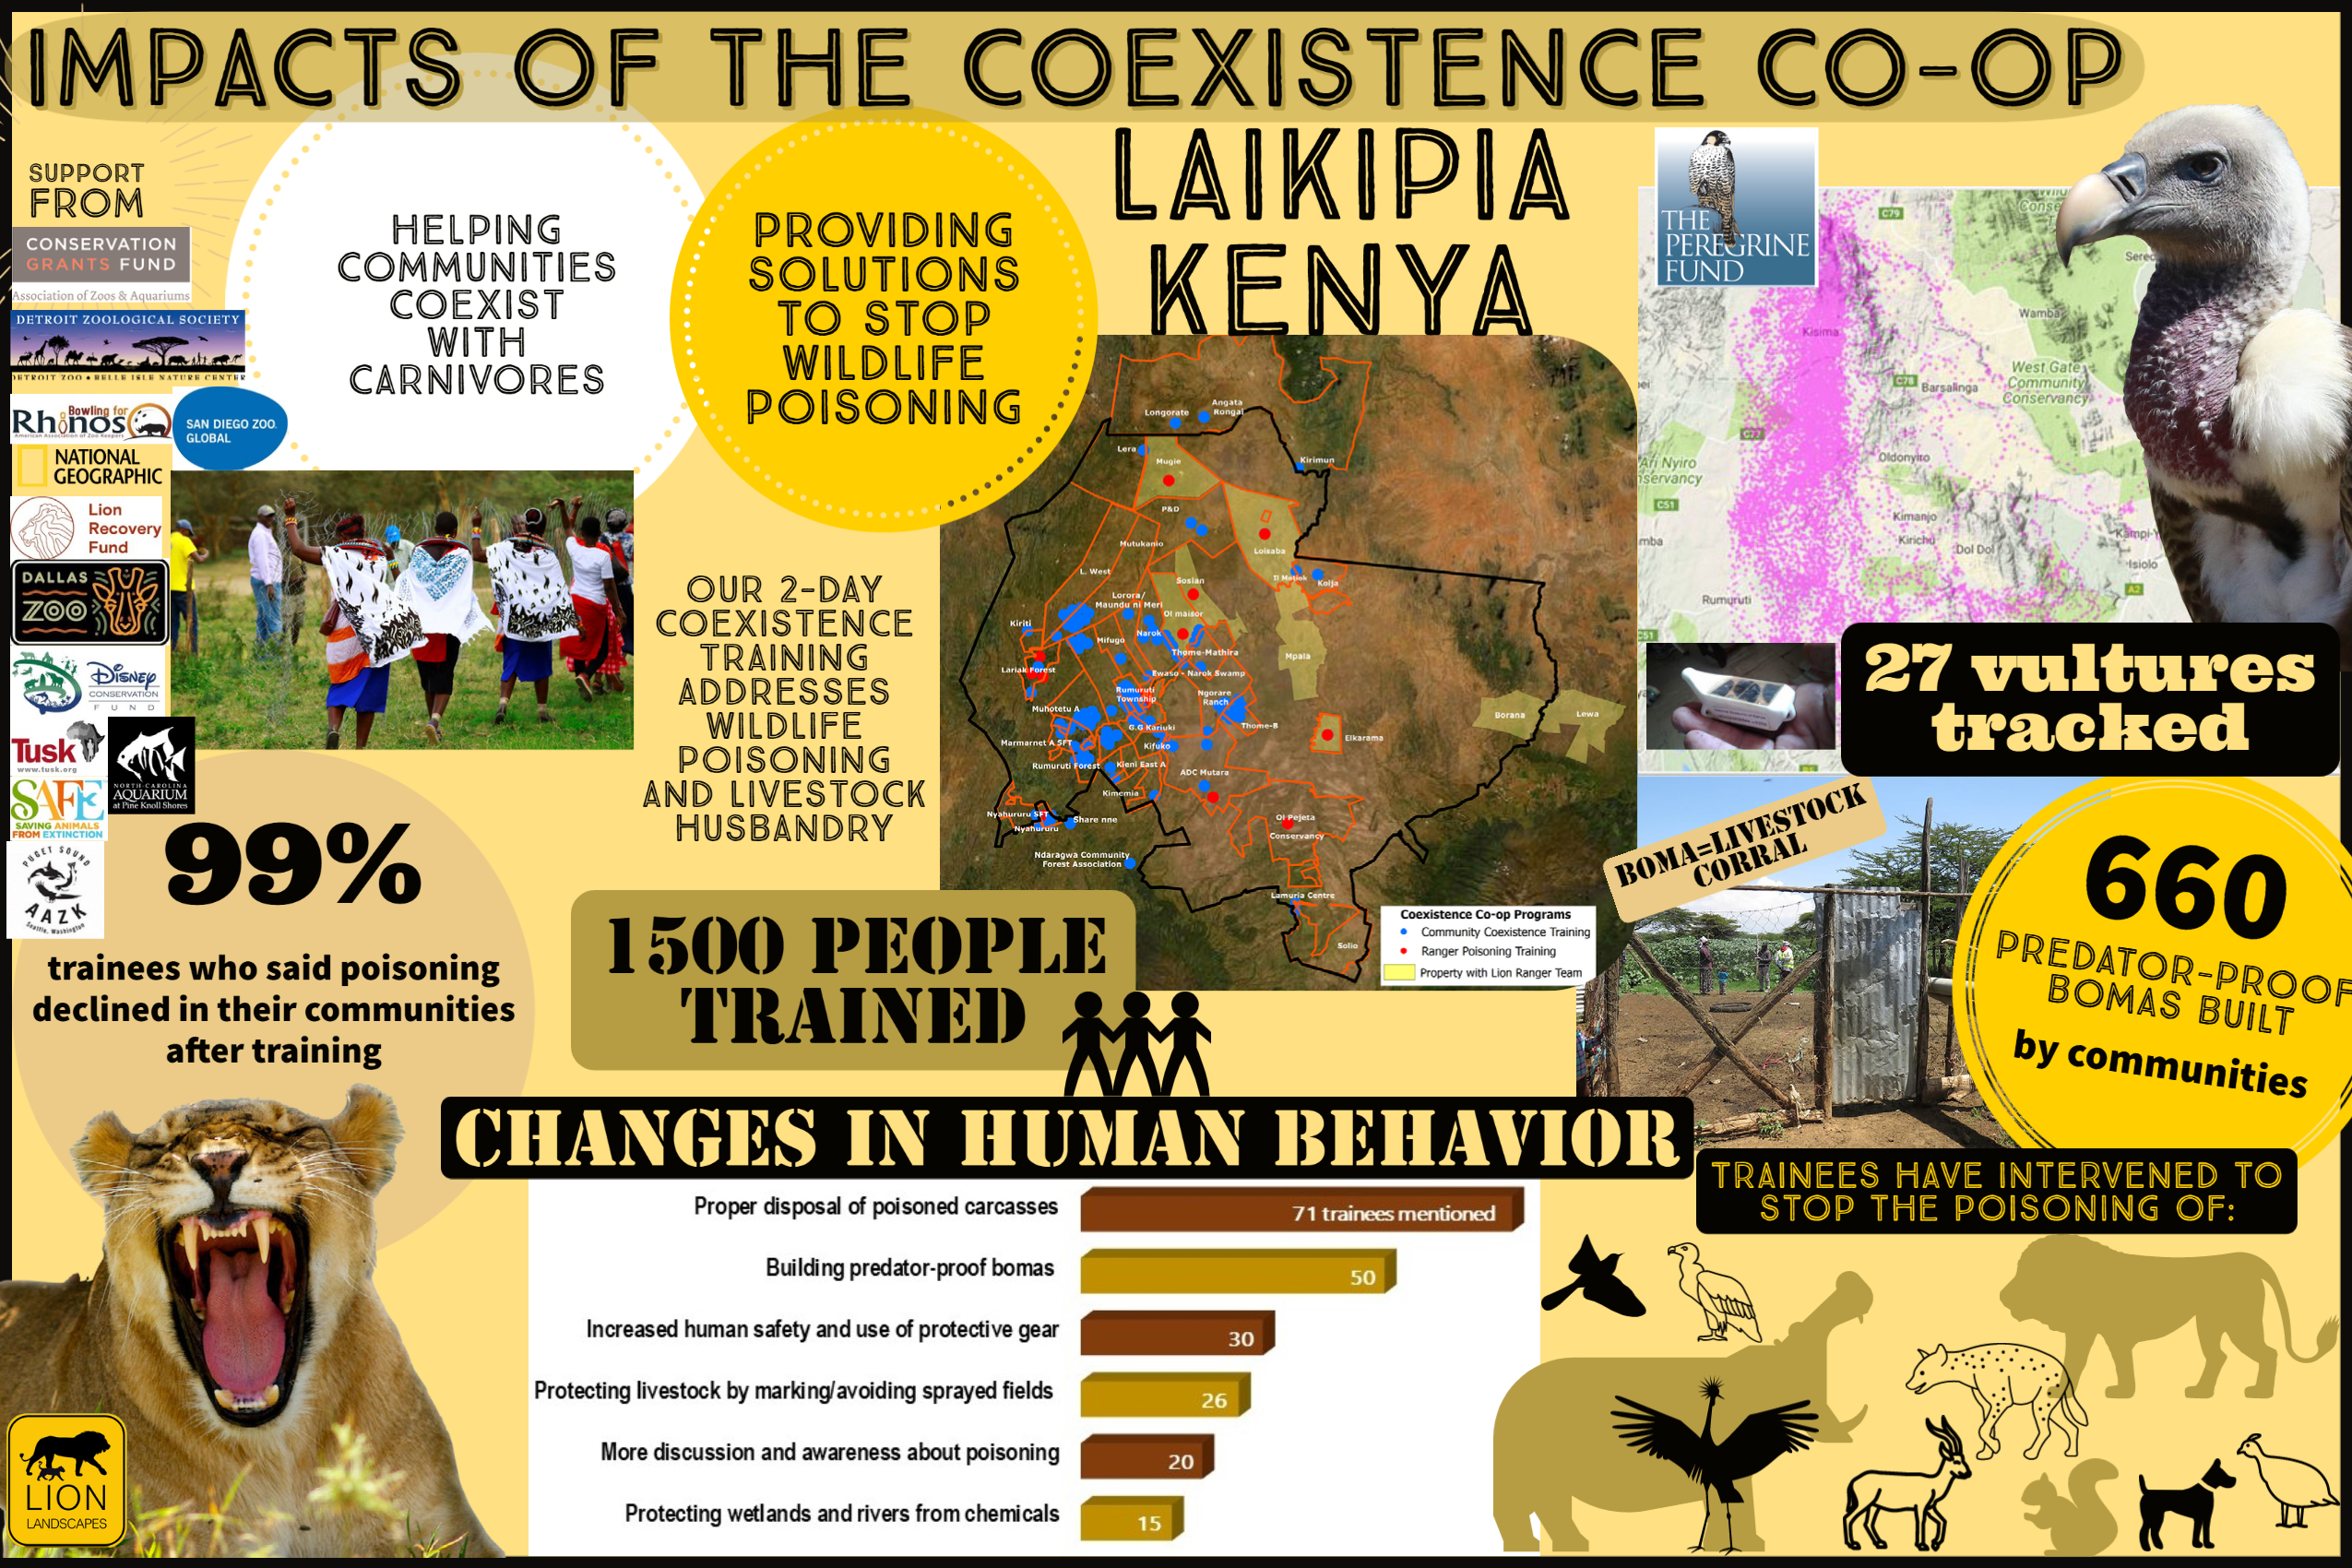 A graphic that shares the following statistics: 99% - the number of trainees who said poisoning declined in their communities after training, 1500 people were trained in 2020, 27 vultures were tracked with telemetry, 660 predator-proof bomas were built by communities, trainees have intervened to stop the poisoning of vultures, cranes, hippos, lions, hyena, antelope, dogs, guinea fowl